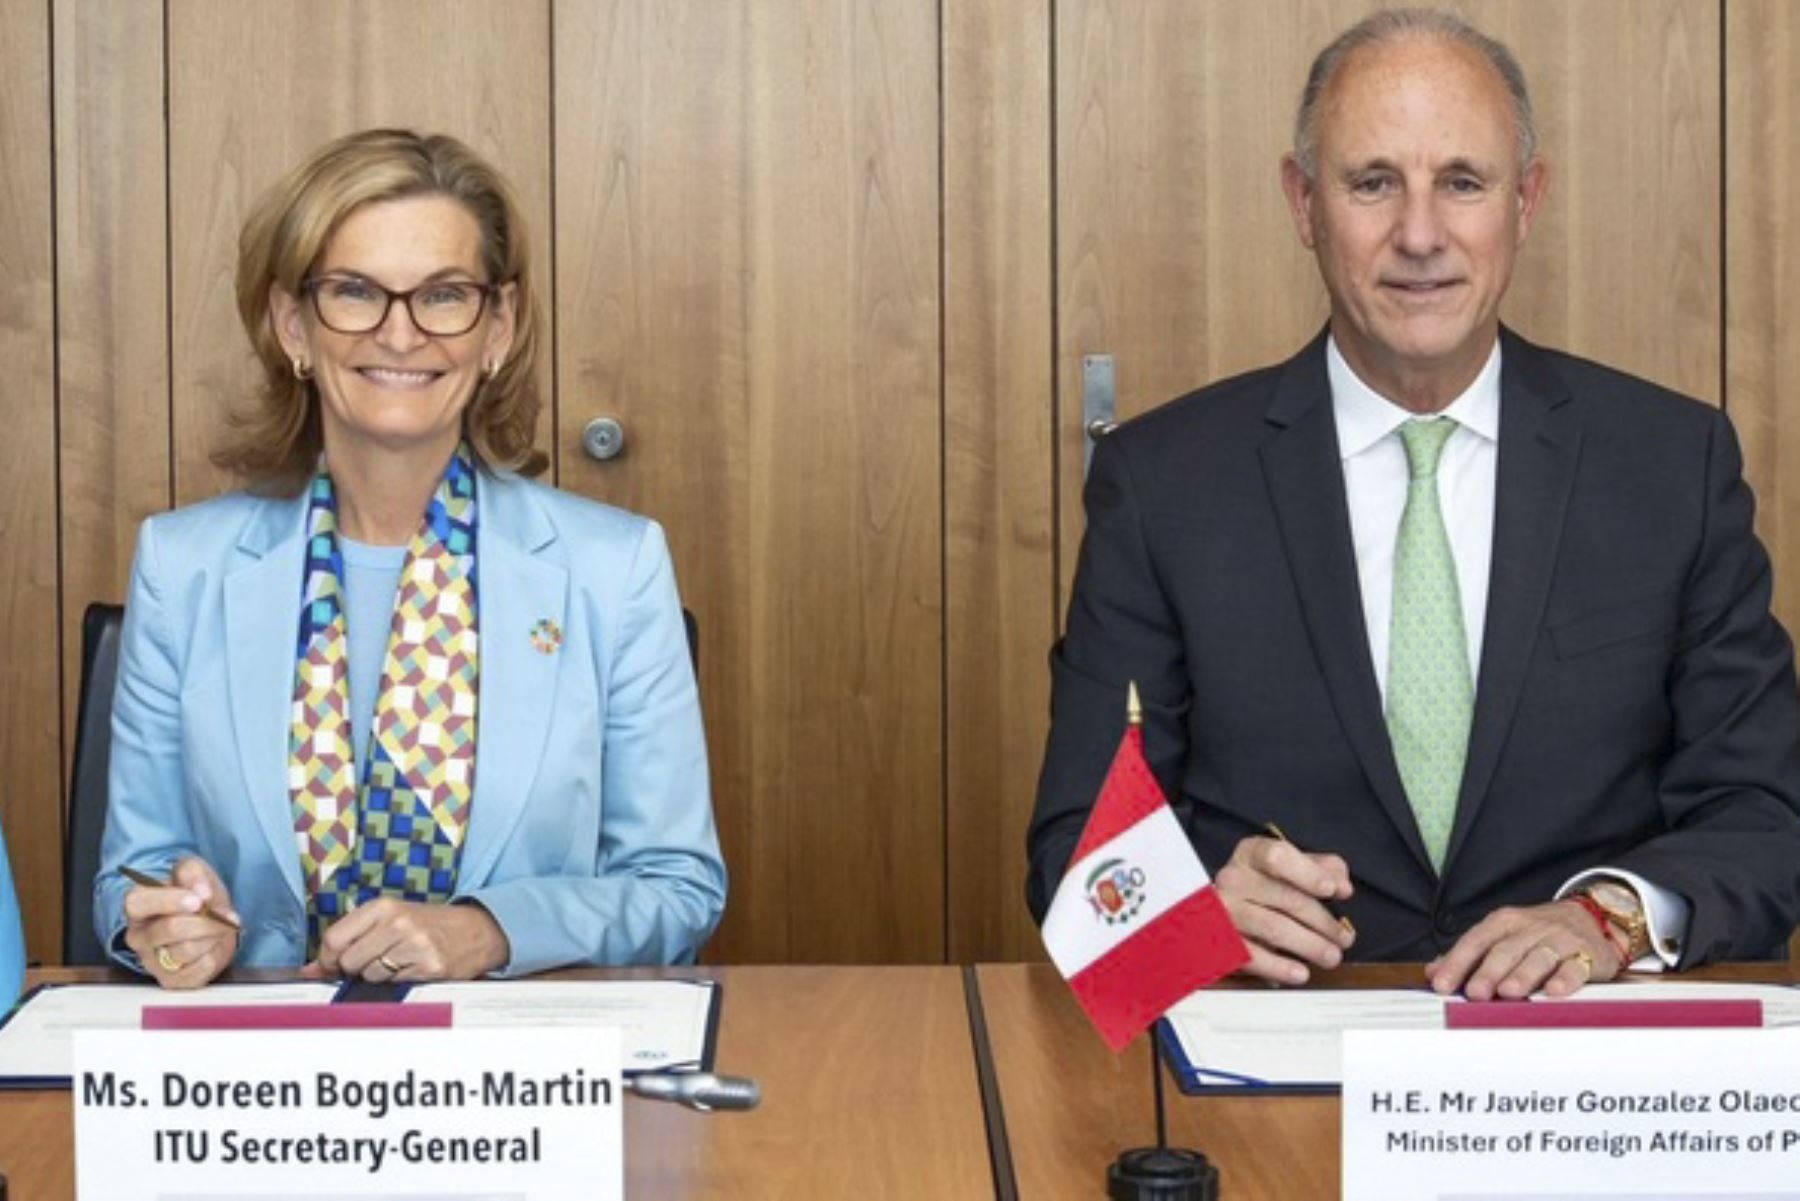 Peru's FA Ministry and ITU sign joint declaration for digital service transformation News